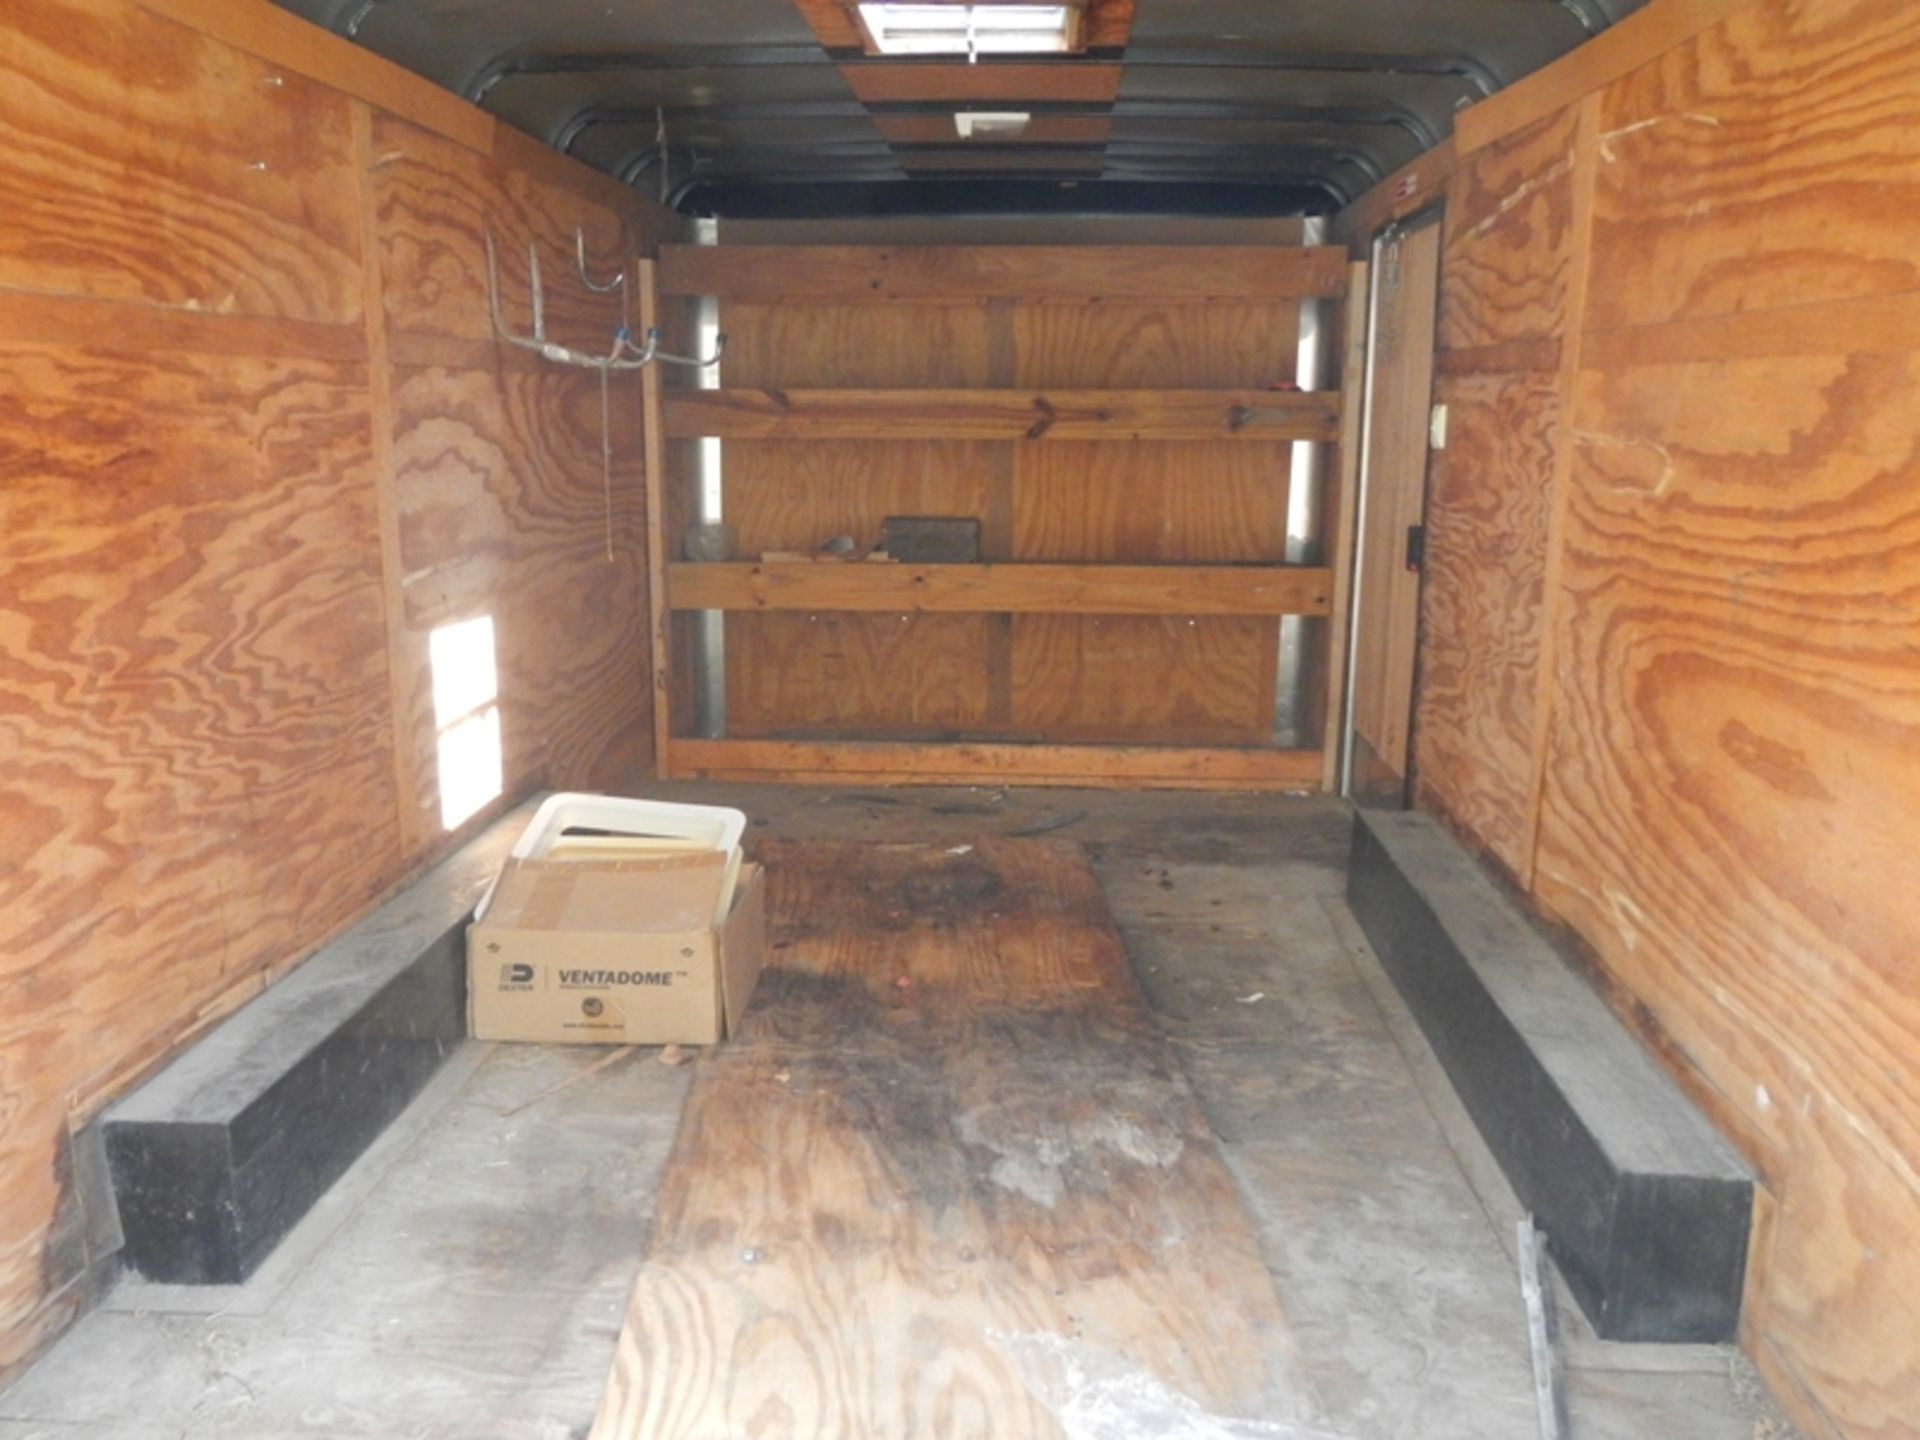 2007 PACE AMERICAN 14' dual axle enclosed trailer 4FPUB14277G115283 top vent in roof needs to be r - Image 6 of 6